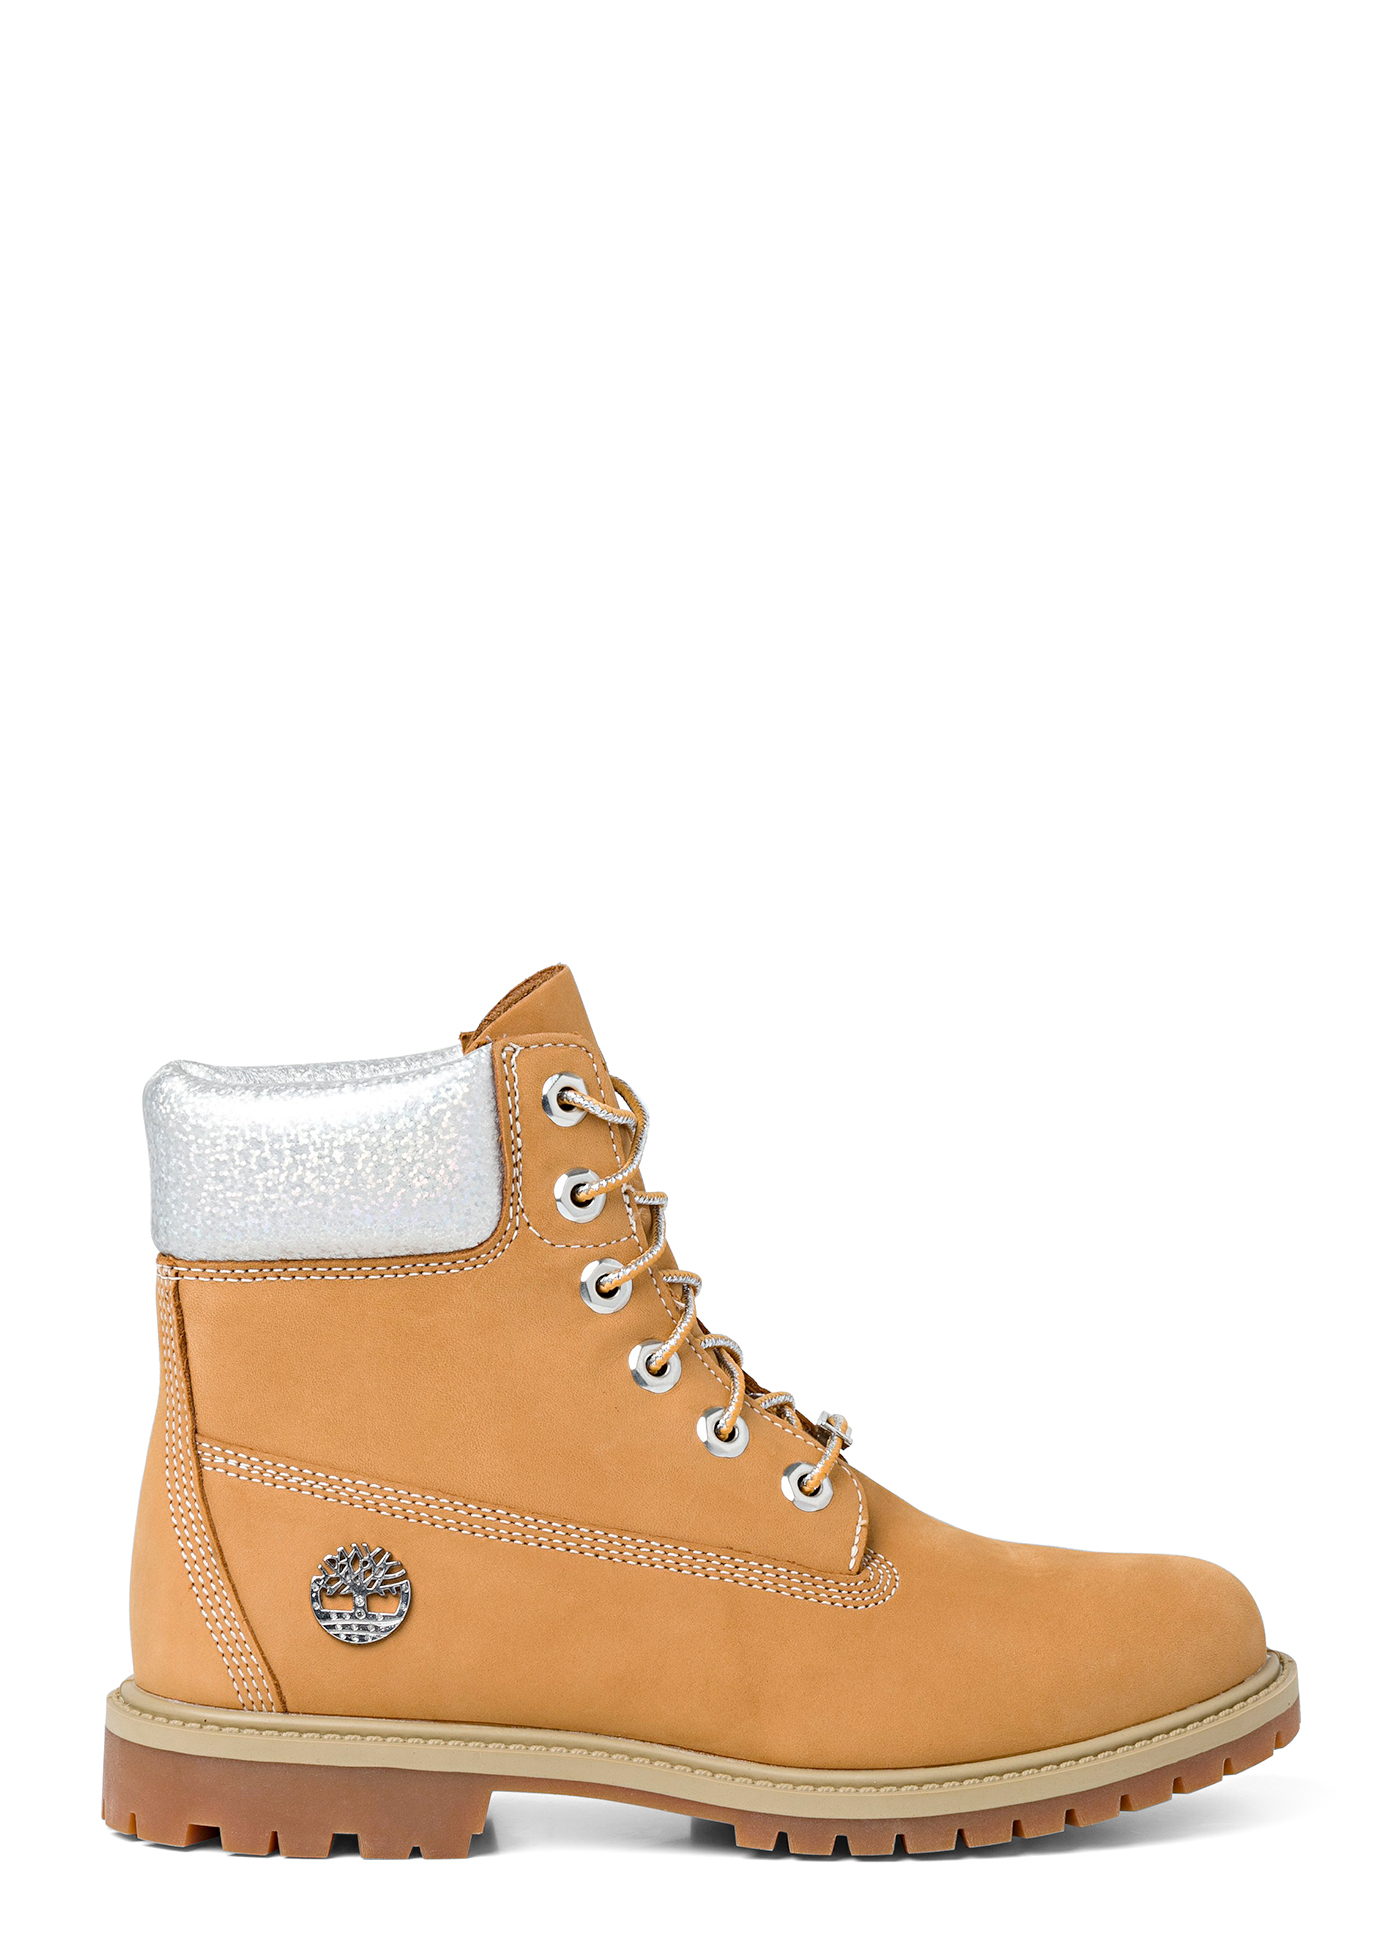 6in Heritage Boot Cupsole - WHEAT NUBUK image number 0